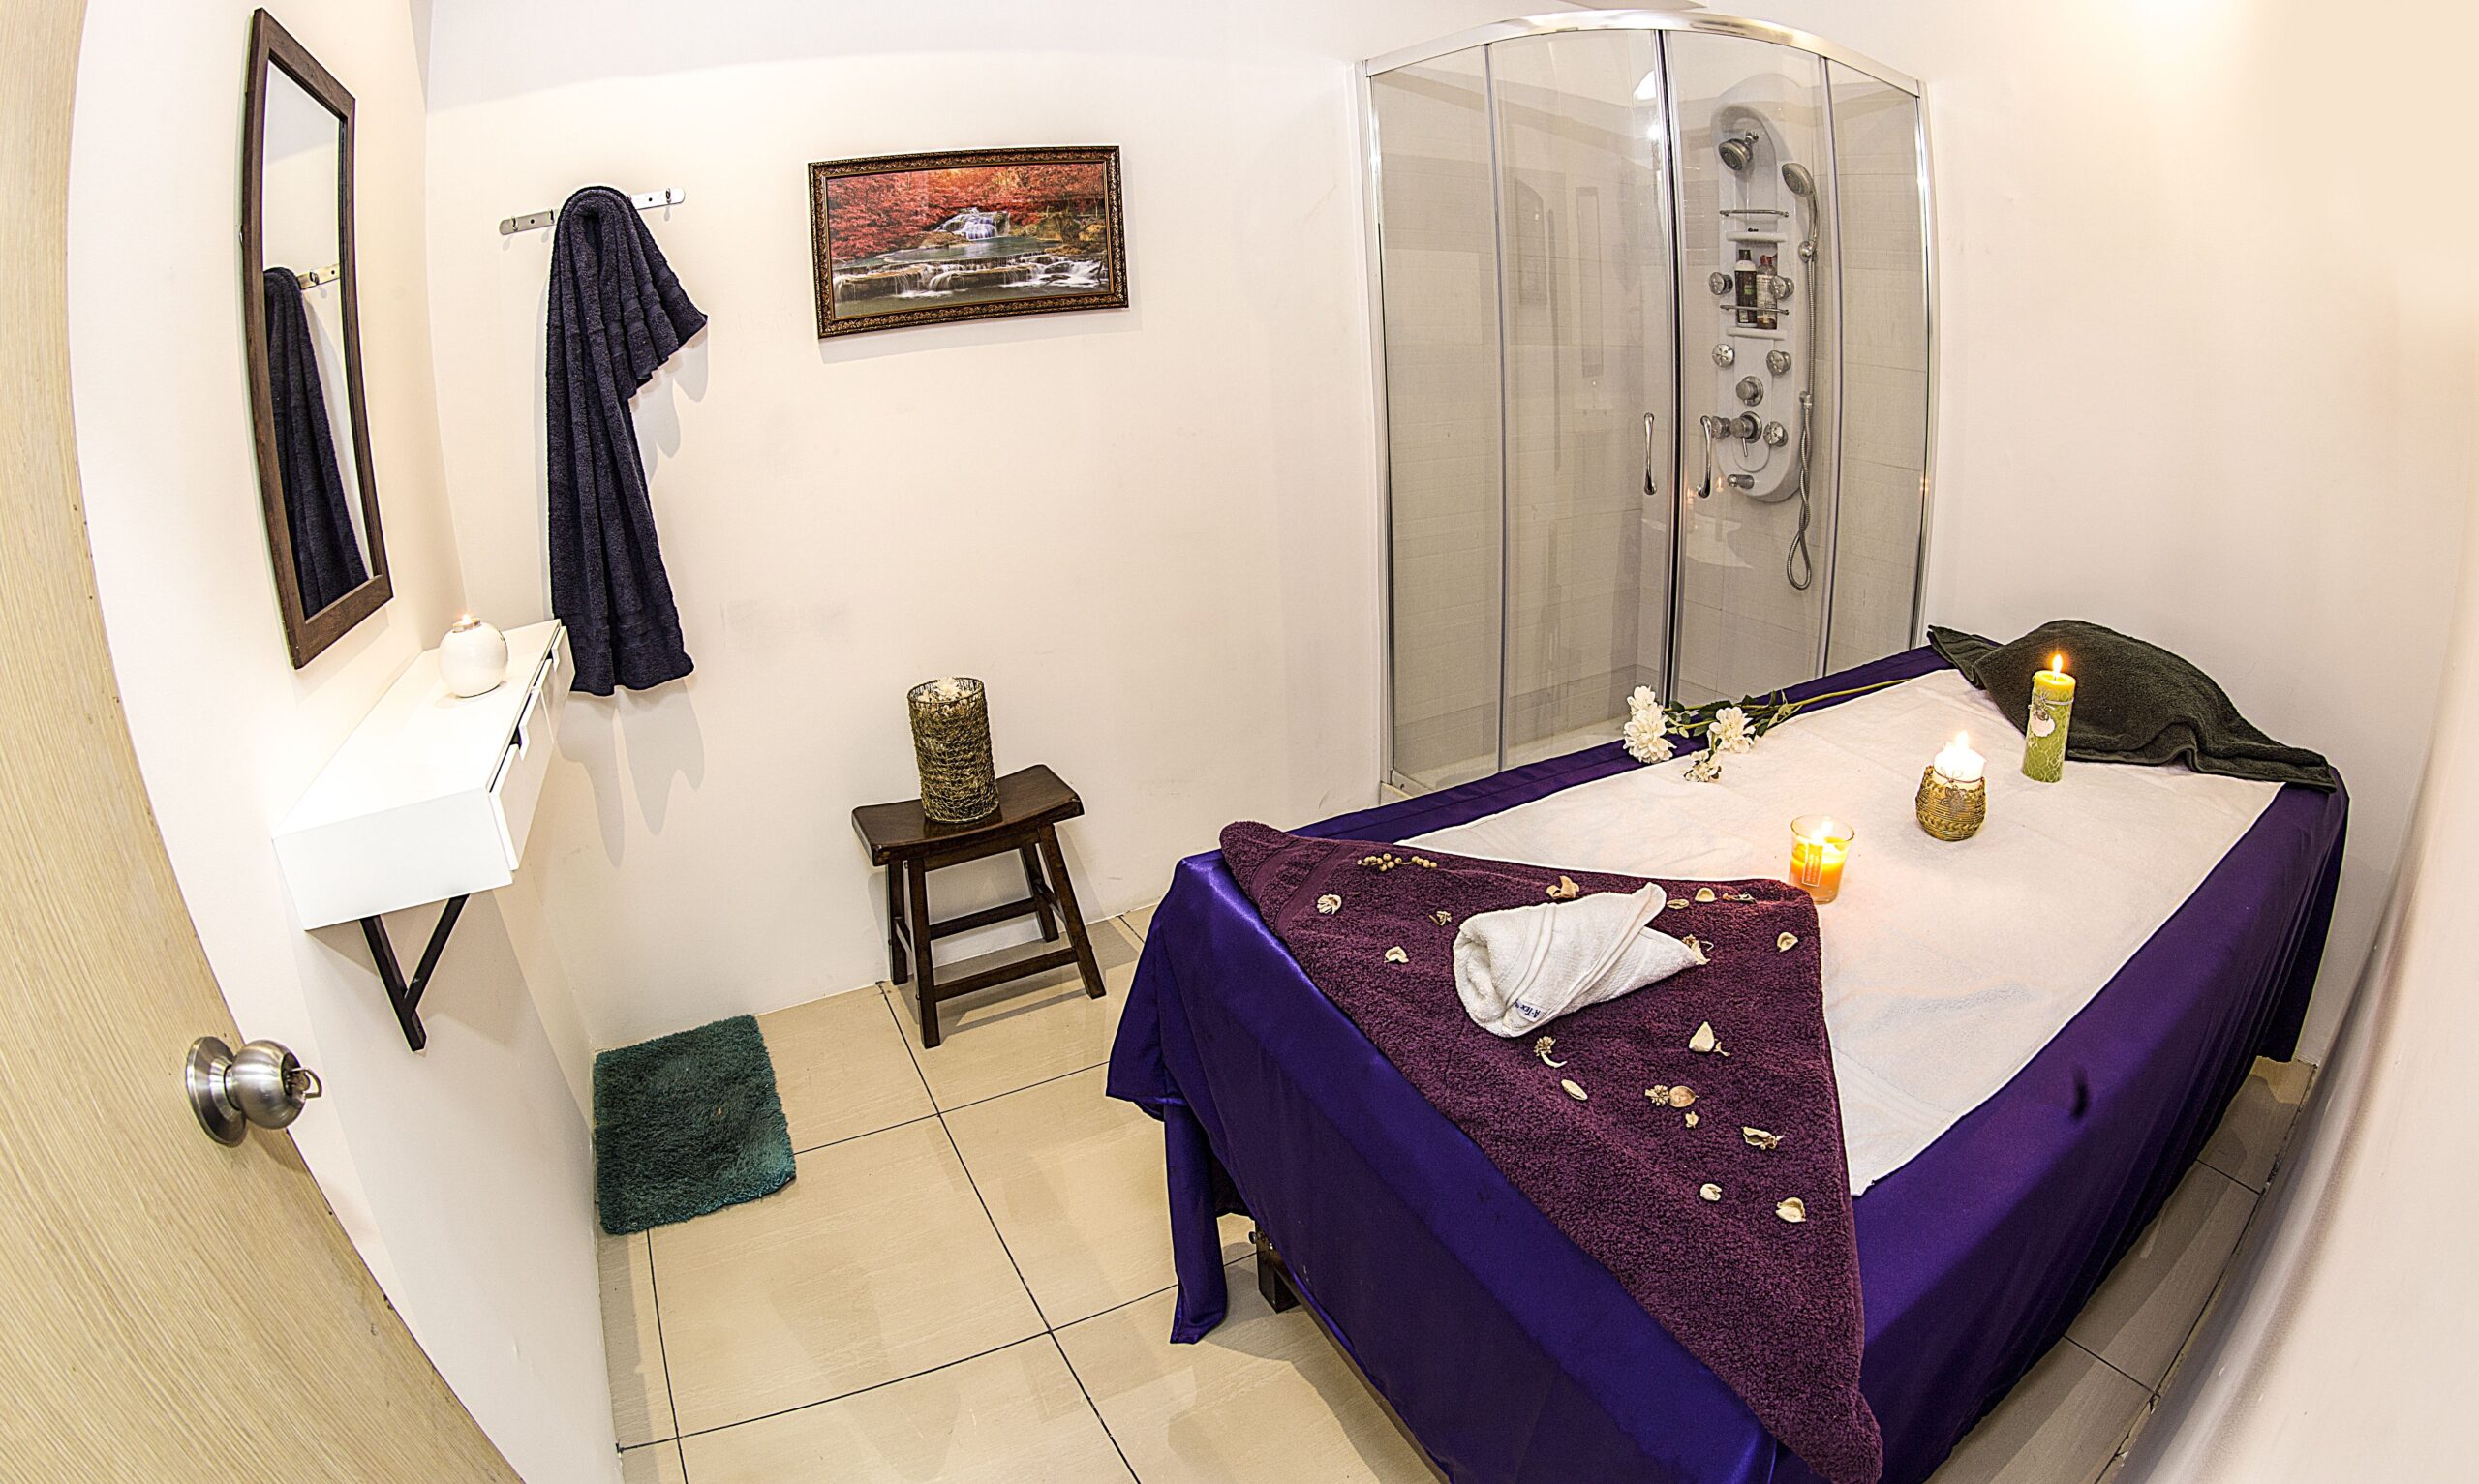 A Full view of the spa room with a beautifully decorated bed with fresh flowers and aromatic candles. A separate shower room is attached near the bed for customers convenience.